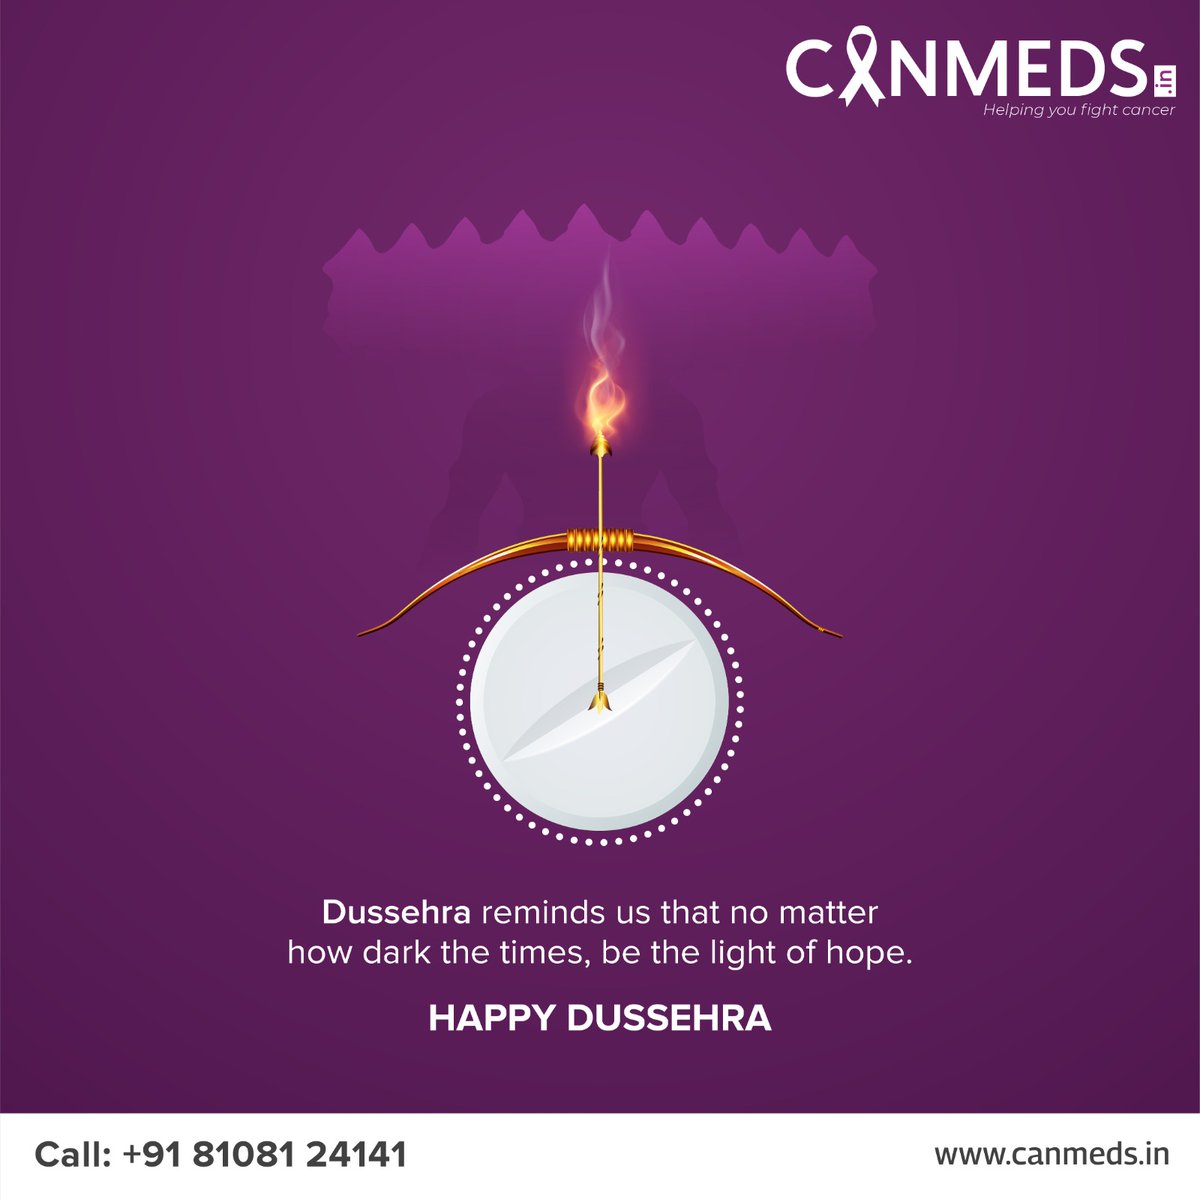 May Dussehra's message of triumph over darkness fill your heart with hope. In the face of challenges, be the beacon of light, leading the way to health and happiness. Happy Dussehra!

#Canmeds #HappyDussehra #DussehraFestival